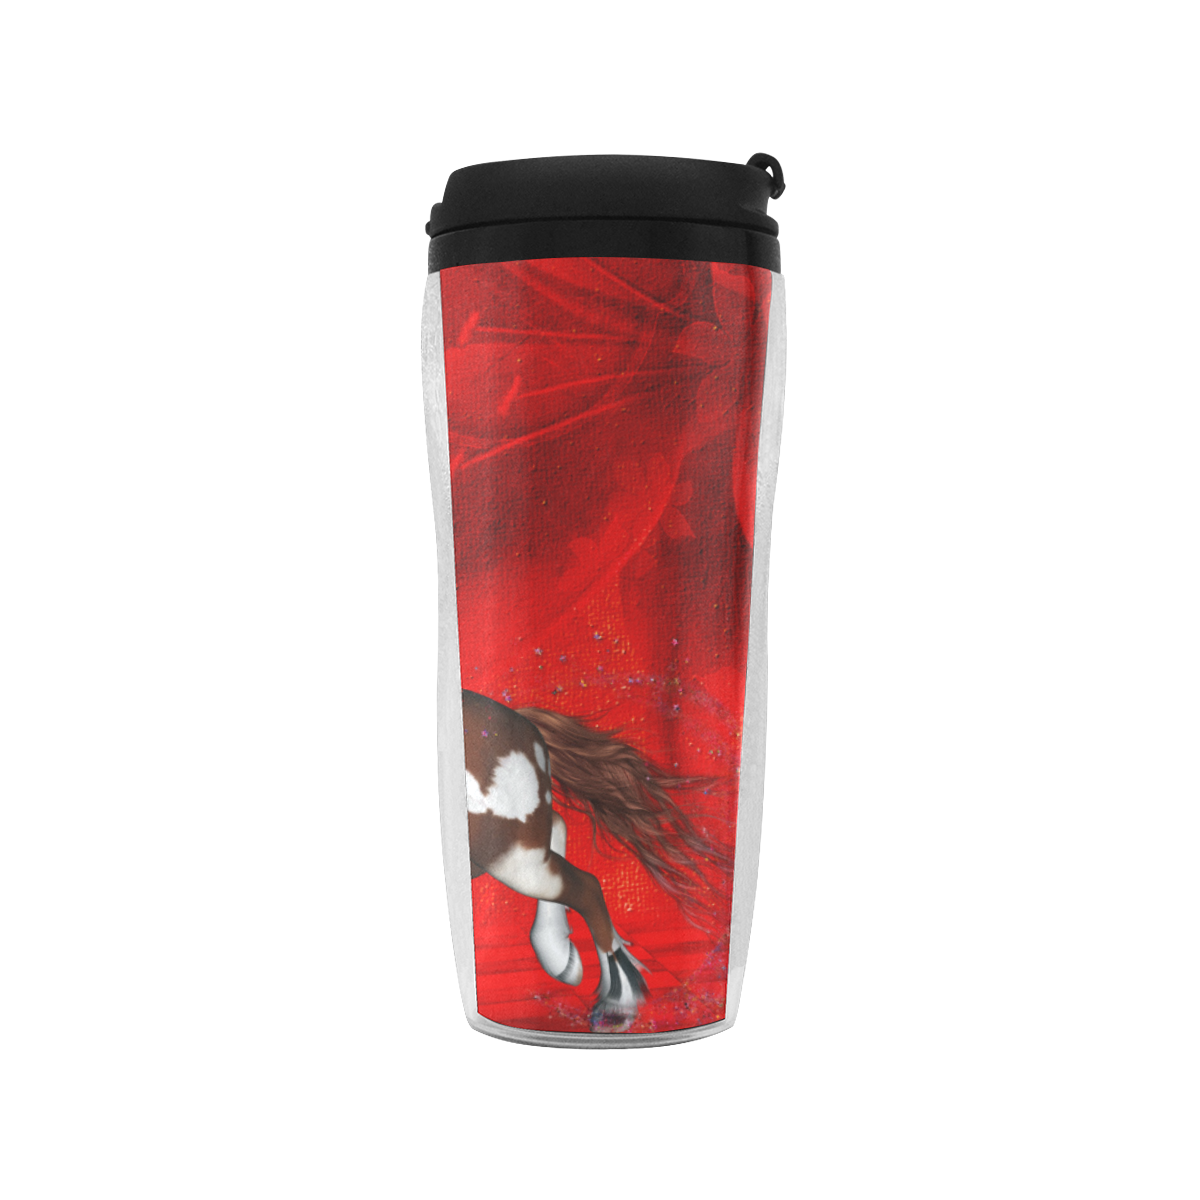 Wild horse on red background Reusable Coffee Cup (11.8oz)